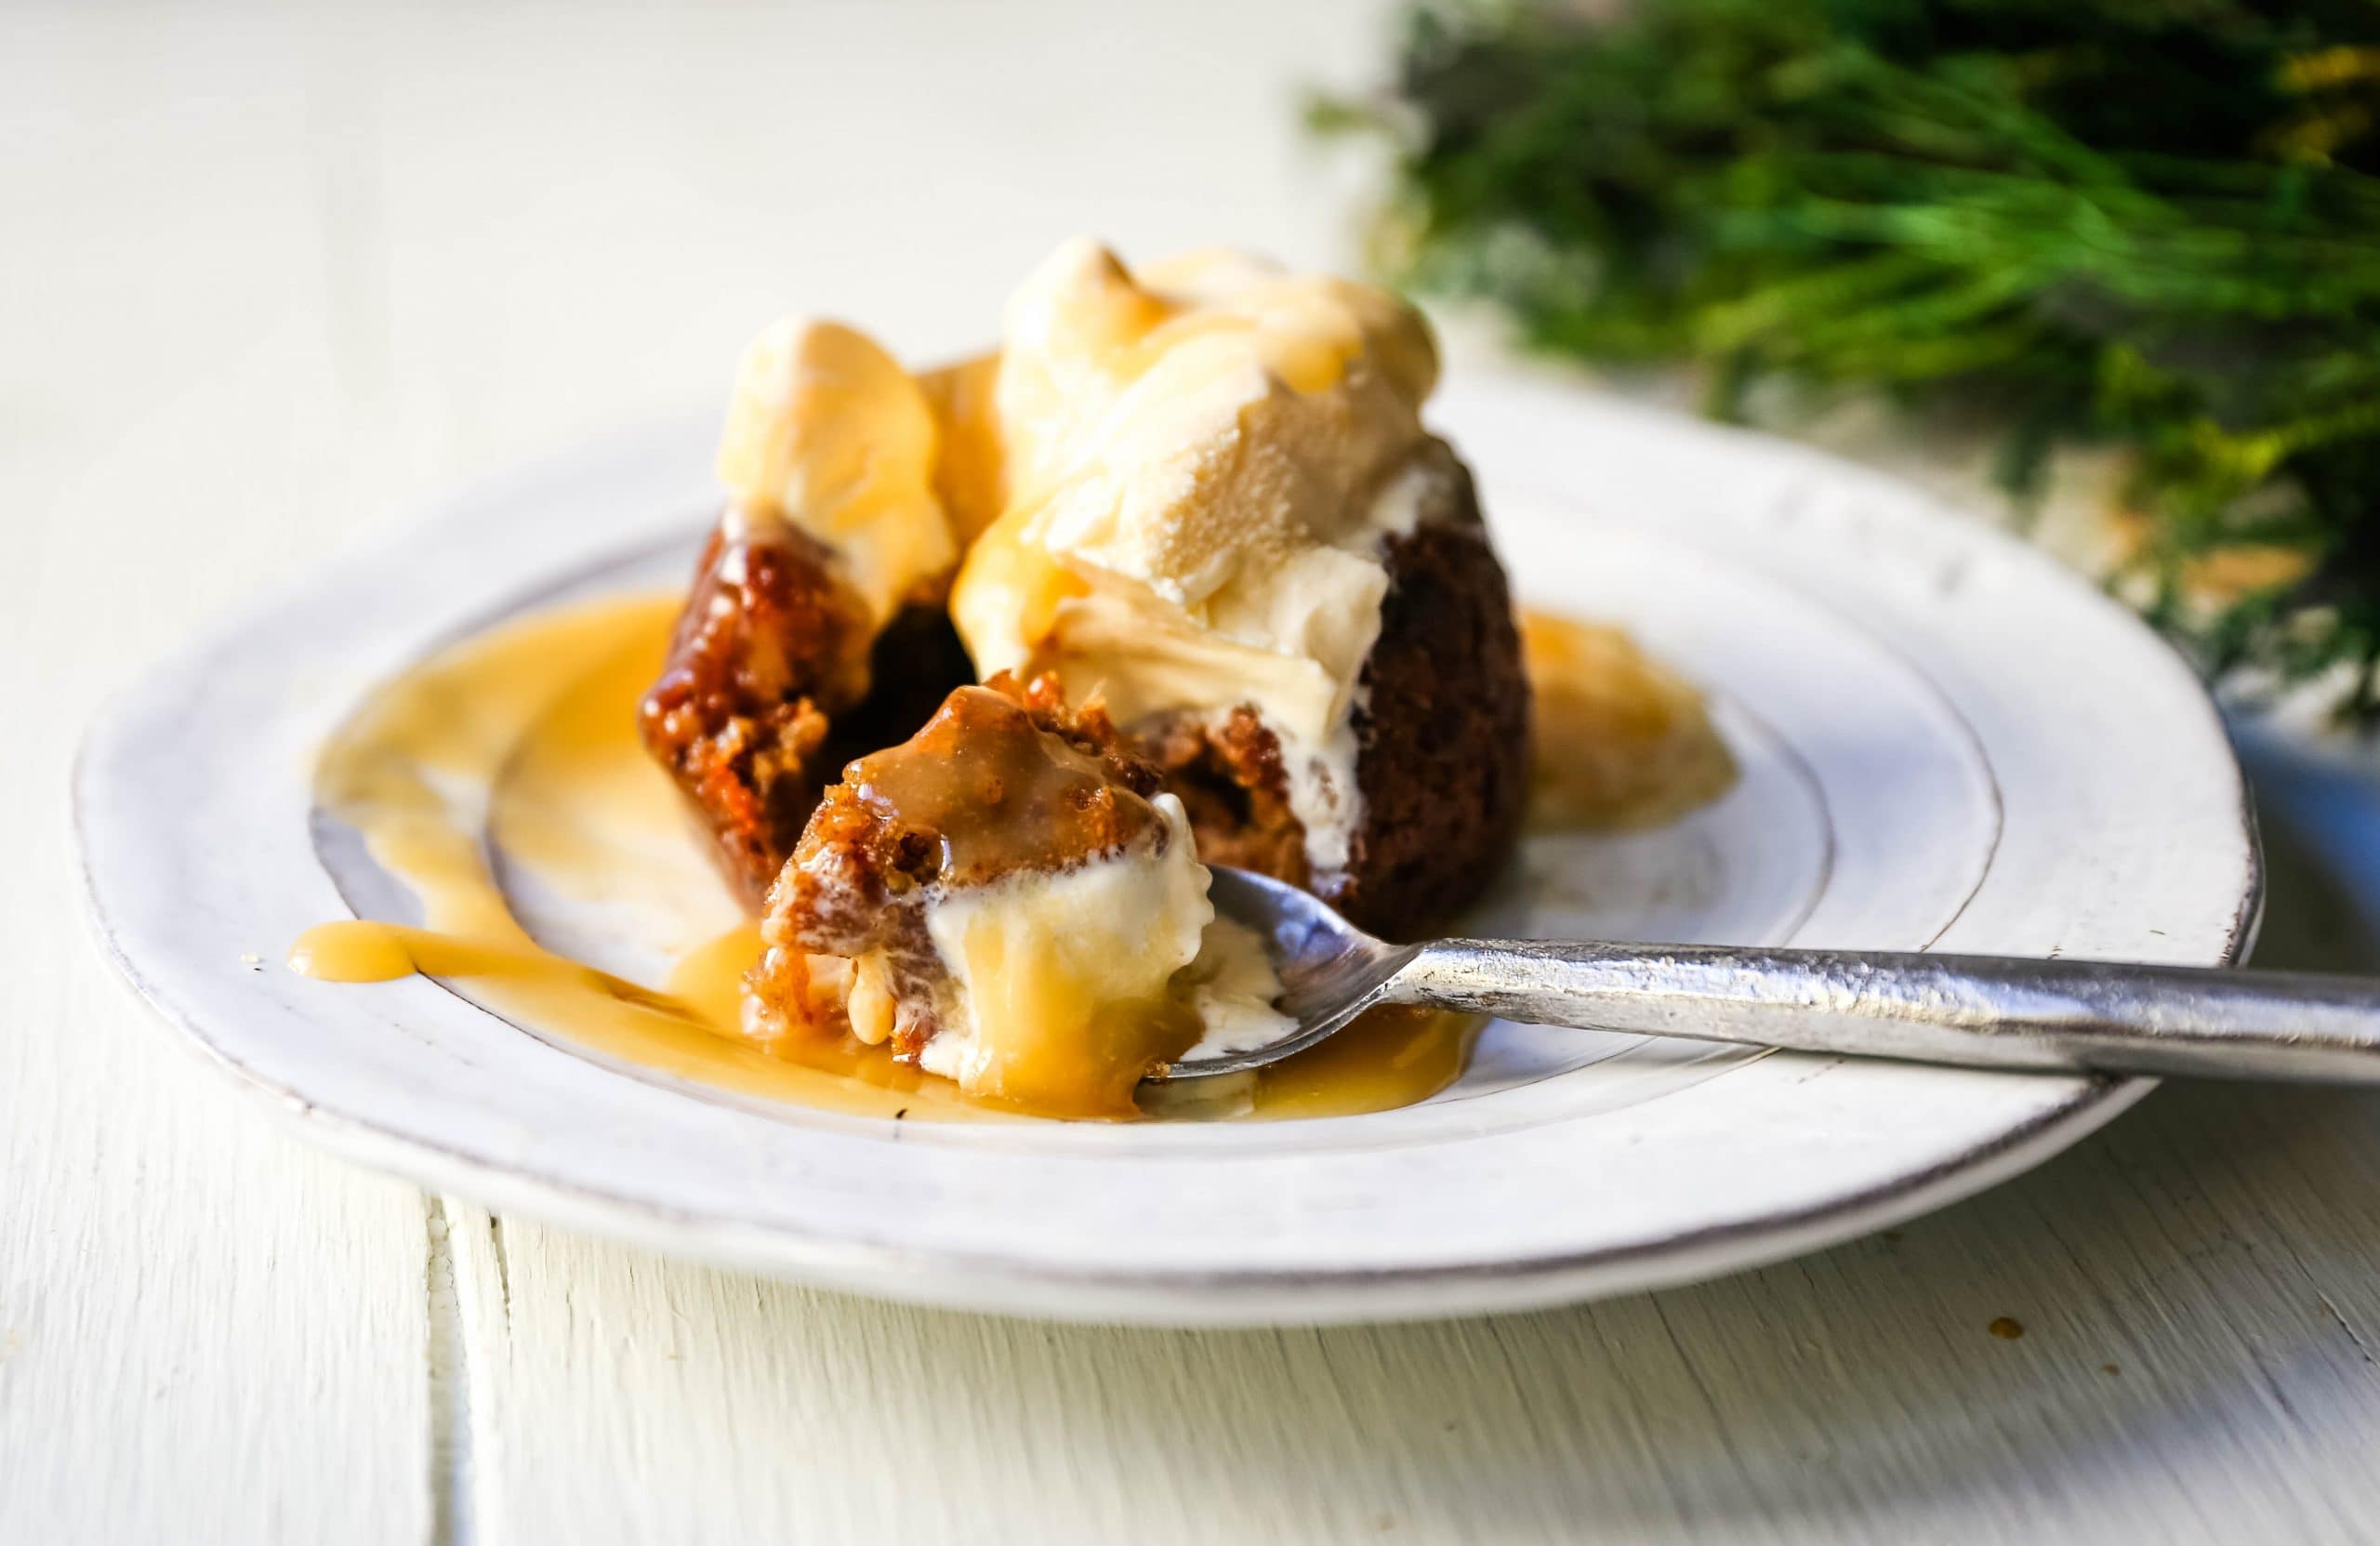 Sticky Toffee Pudding. A famous English dessert with a moist sponge cake covered in a homemade caramel toffee sauce and vanilla ice cream. The perfect Christmas dessert or holiday dessert recipe. A Christmas traditional dessert. www.modernhoney.com #stickytoffeepudding #toffeepudding #stickypudding #datecake